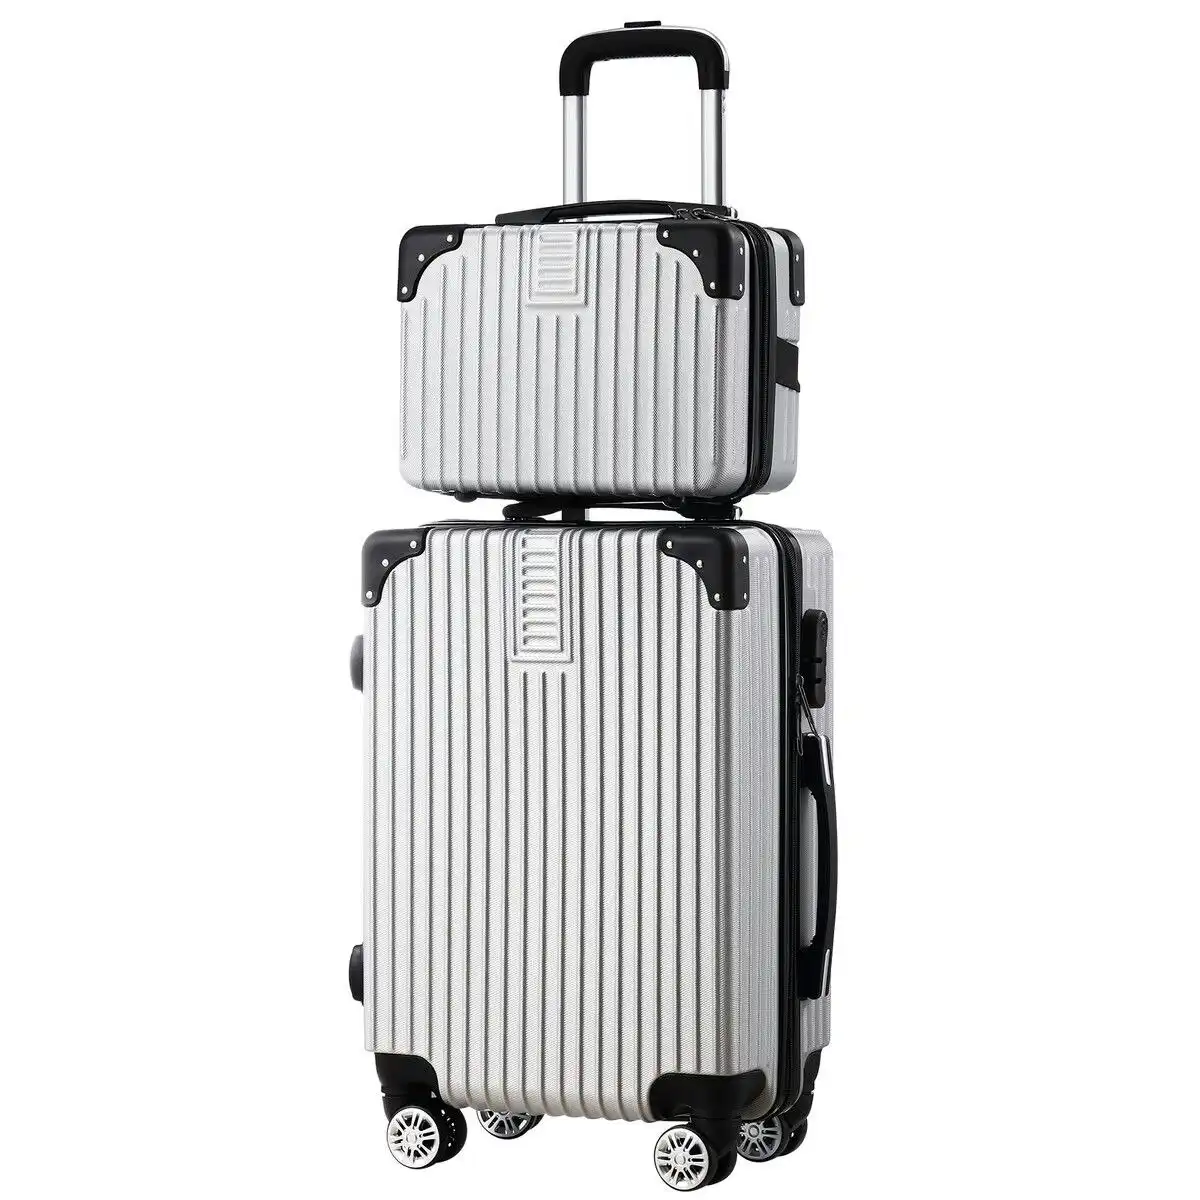 Buon Viaggio 2 Piece Luggage Set Carry On Travel Suitcases Hard Shell Lightweight Traveller Checked Rolling Travelling Trolley Vanity Bag